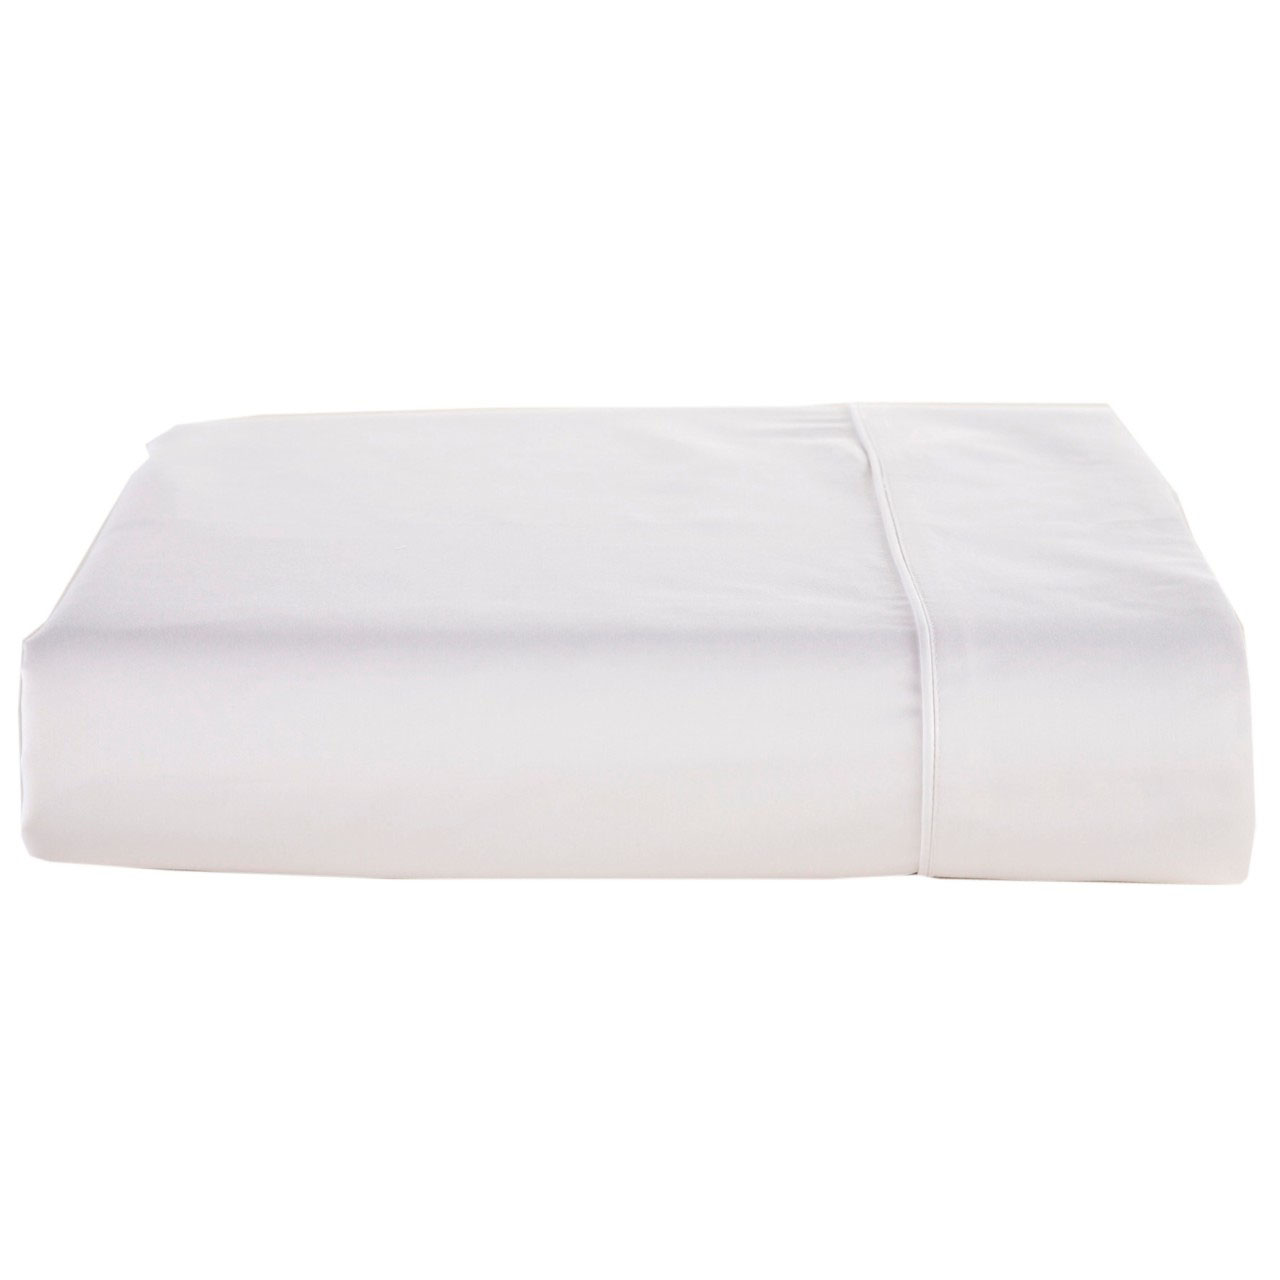 400 Thread Count Egyptian Cotton Extra Deep Fitted Sheet 46cm